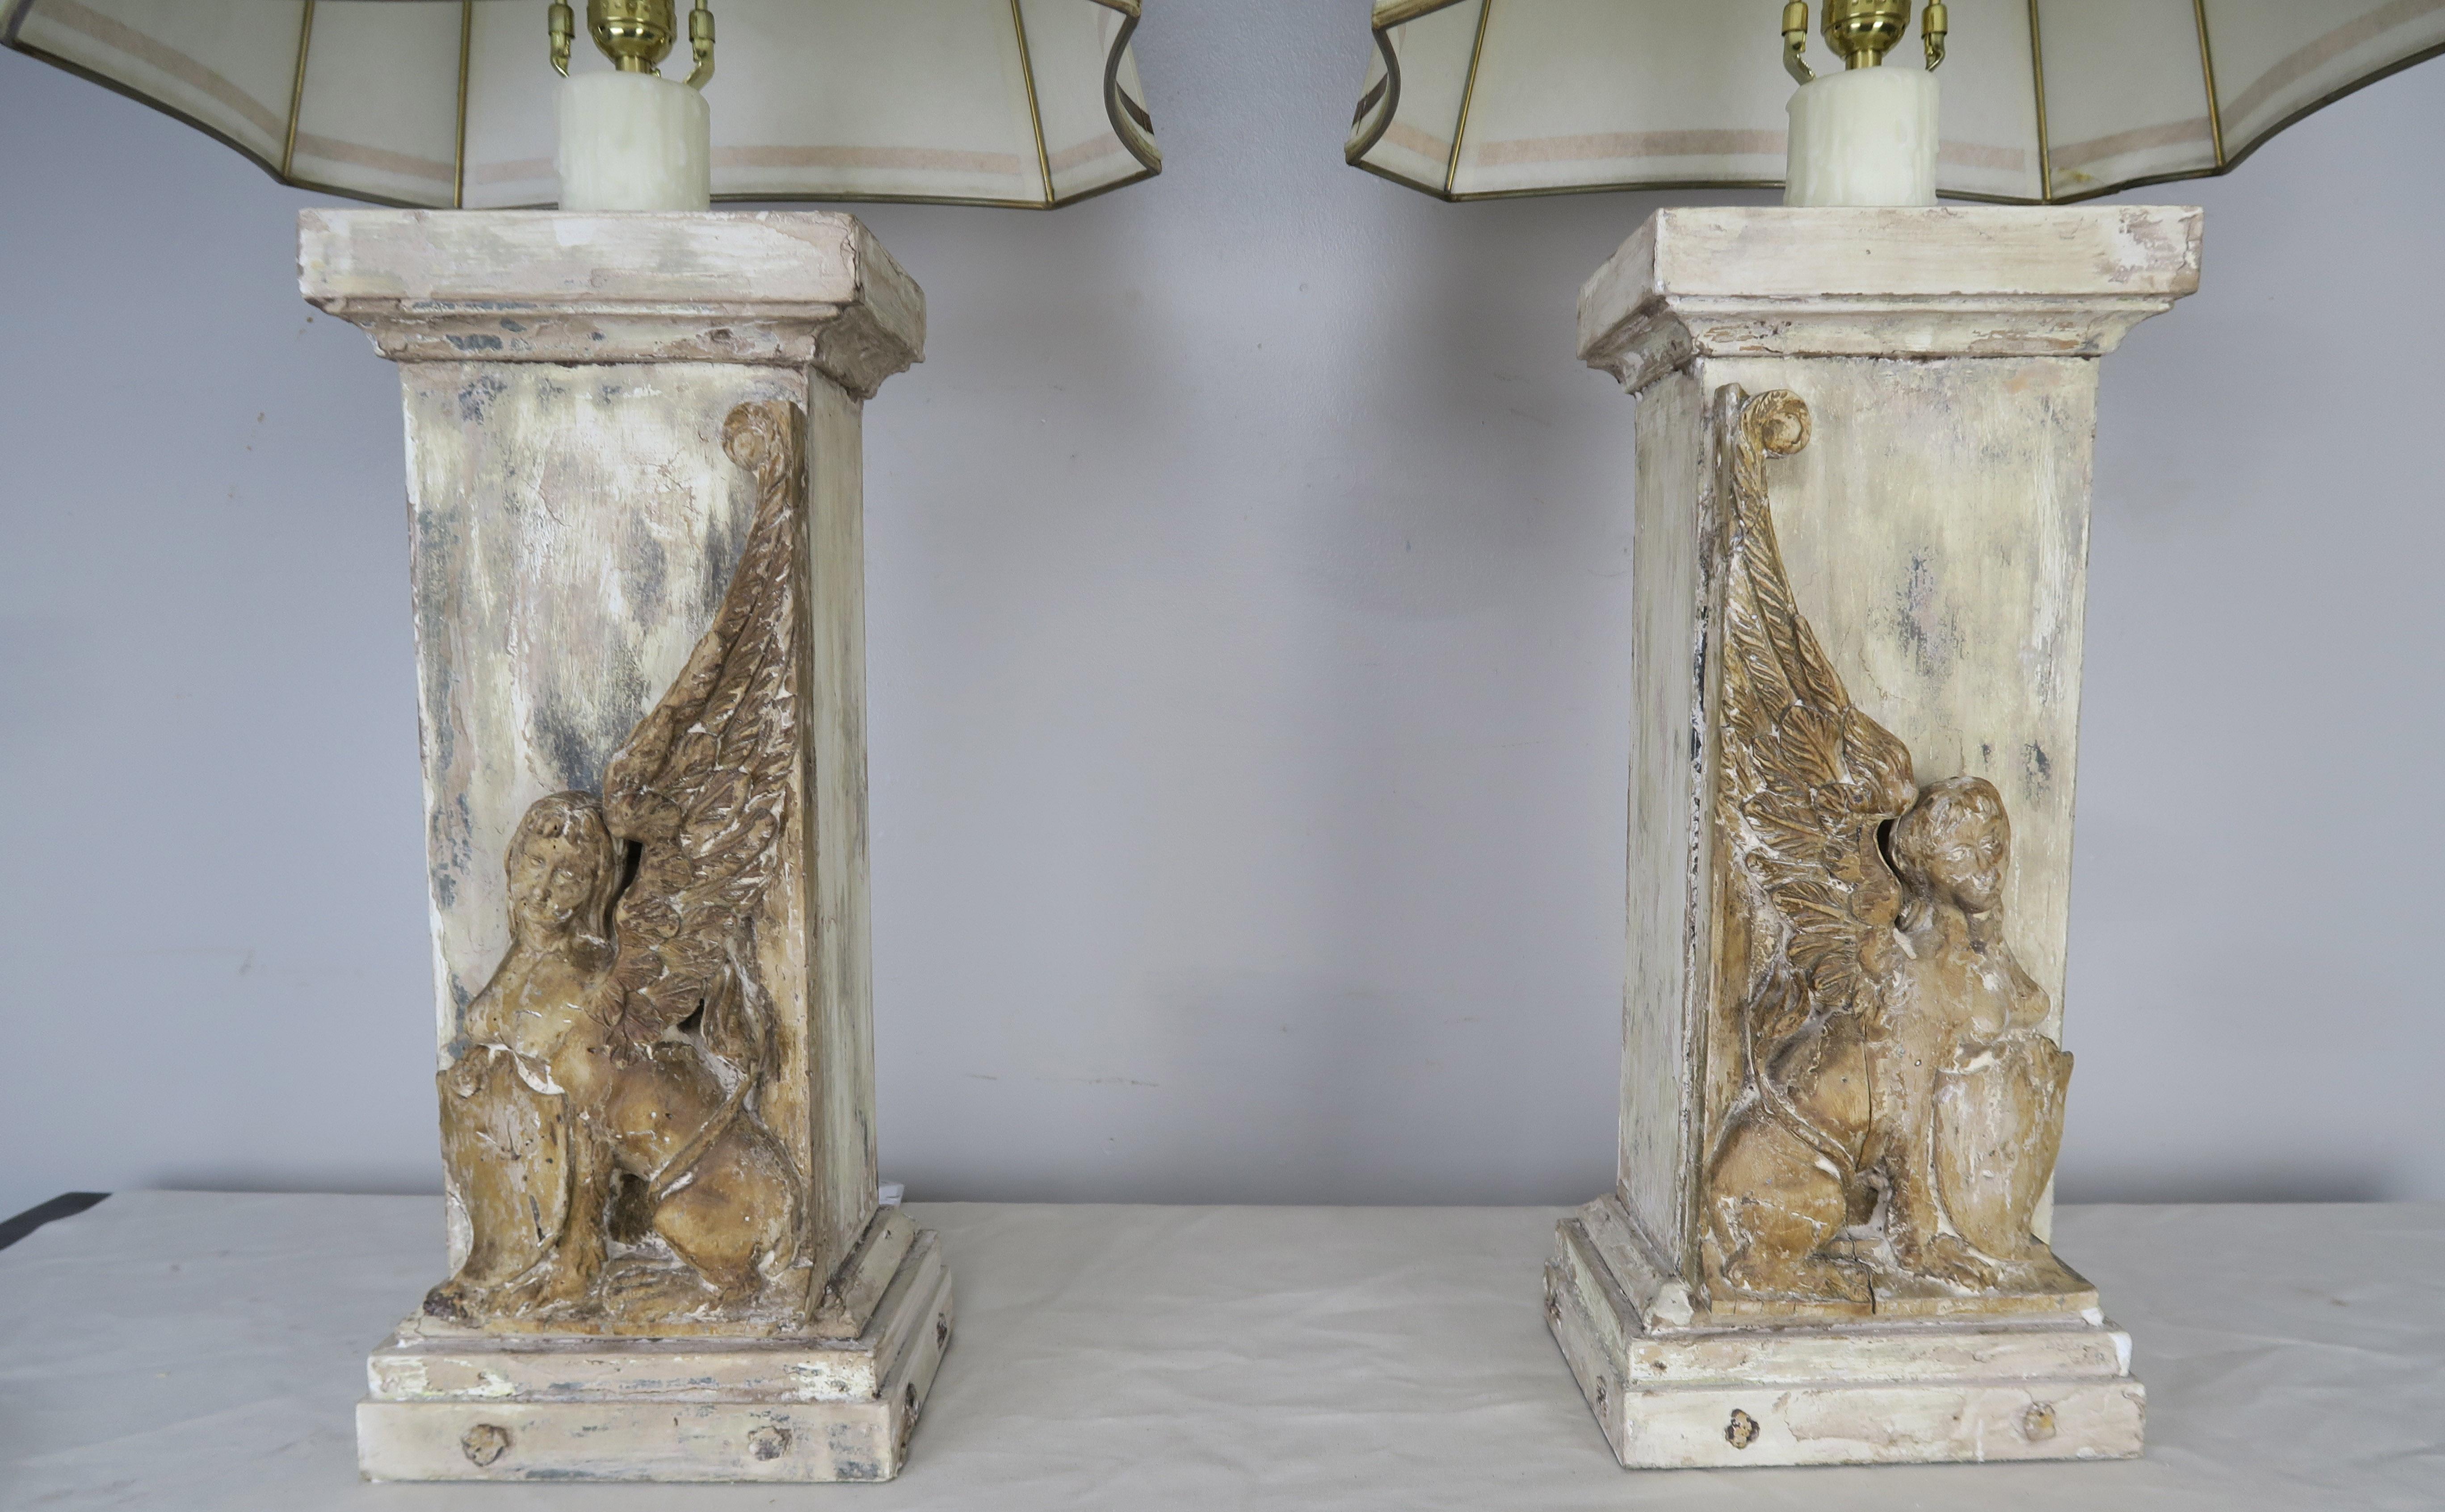 Pair of custom painted lamps made with 19th century carved wood sphinx combined with reclaimed wood to create a one-of-a-kind pair of lamps. The lamps are crowned with custom hand painted parchment shade that coordinate perfectly with the bases. The